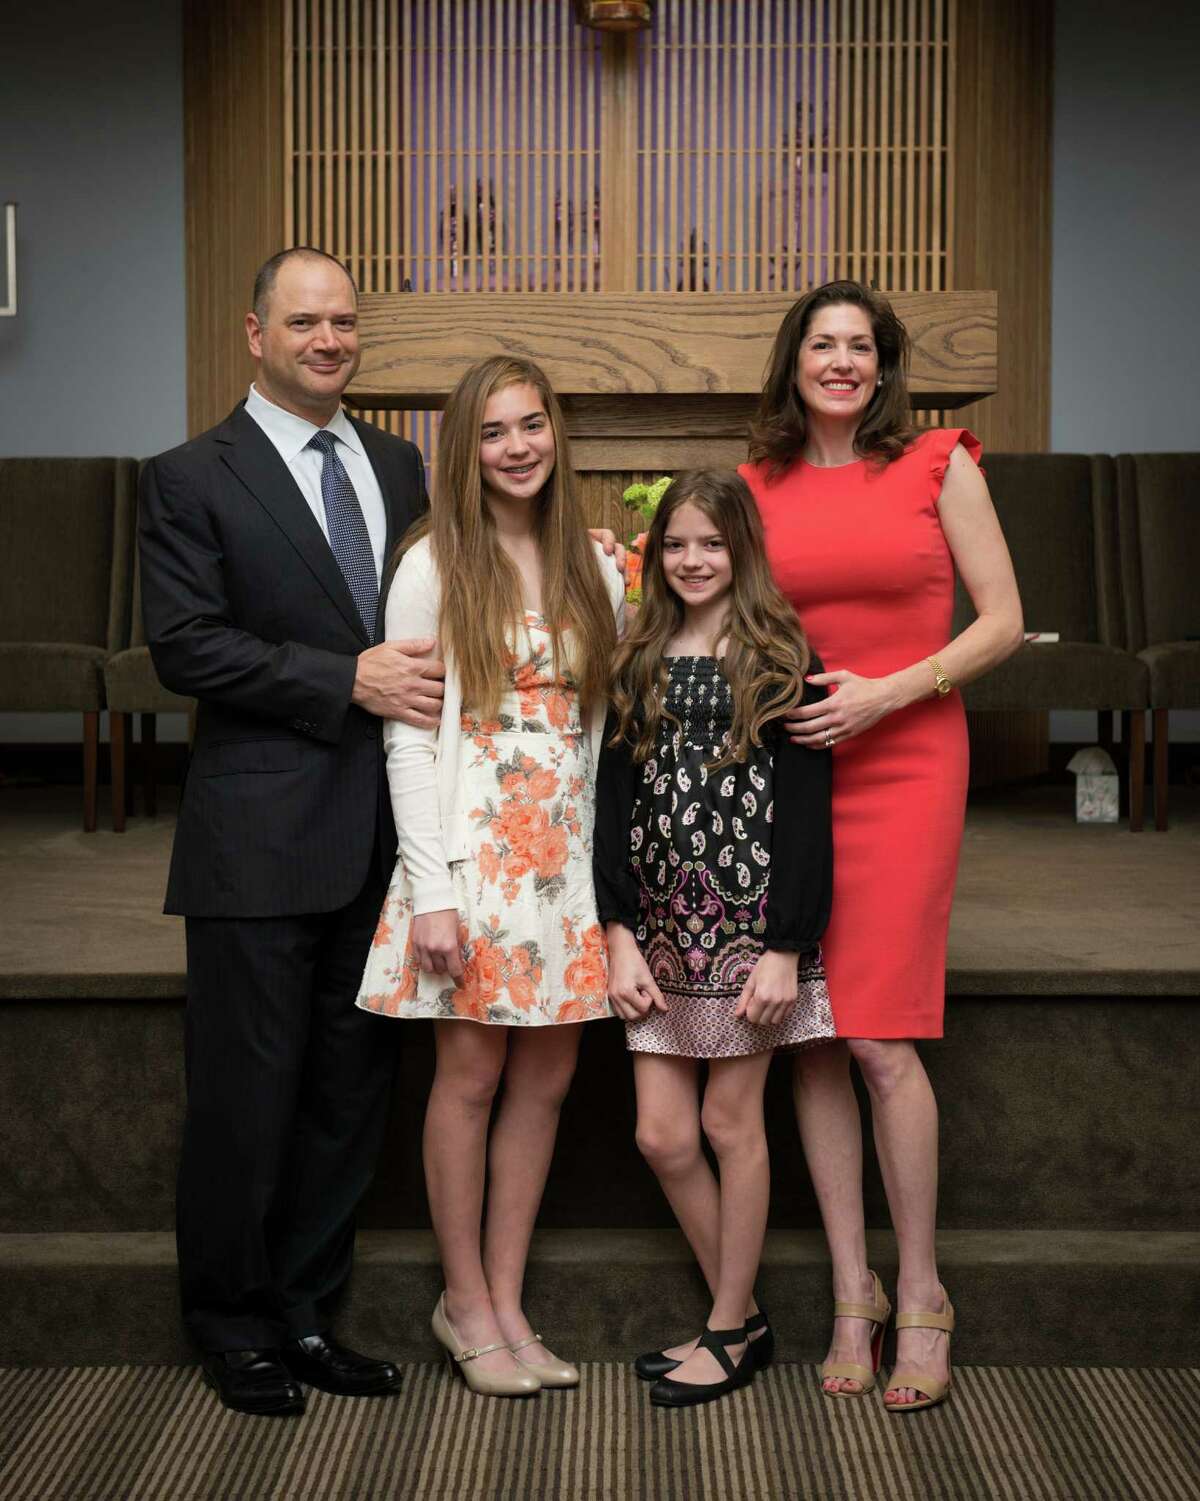 Geoffrey, Layla, Lilly and Lauren Harrison at the Houston Congregation for Reform Judaism